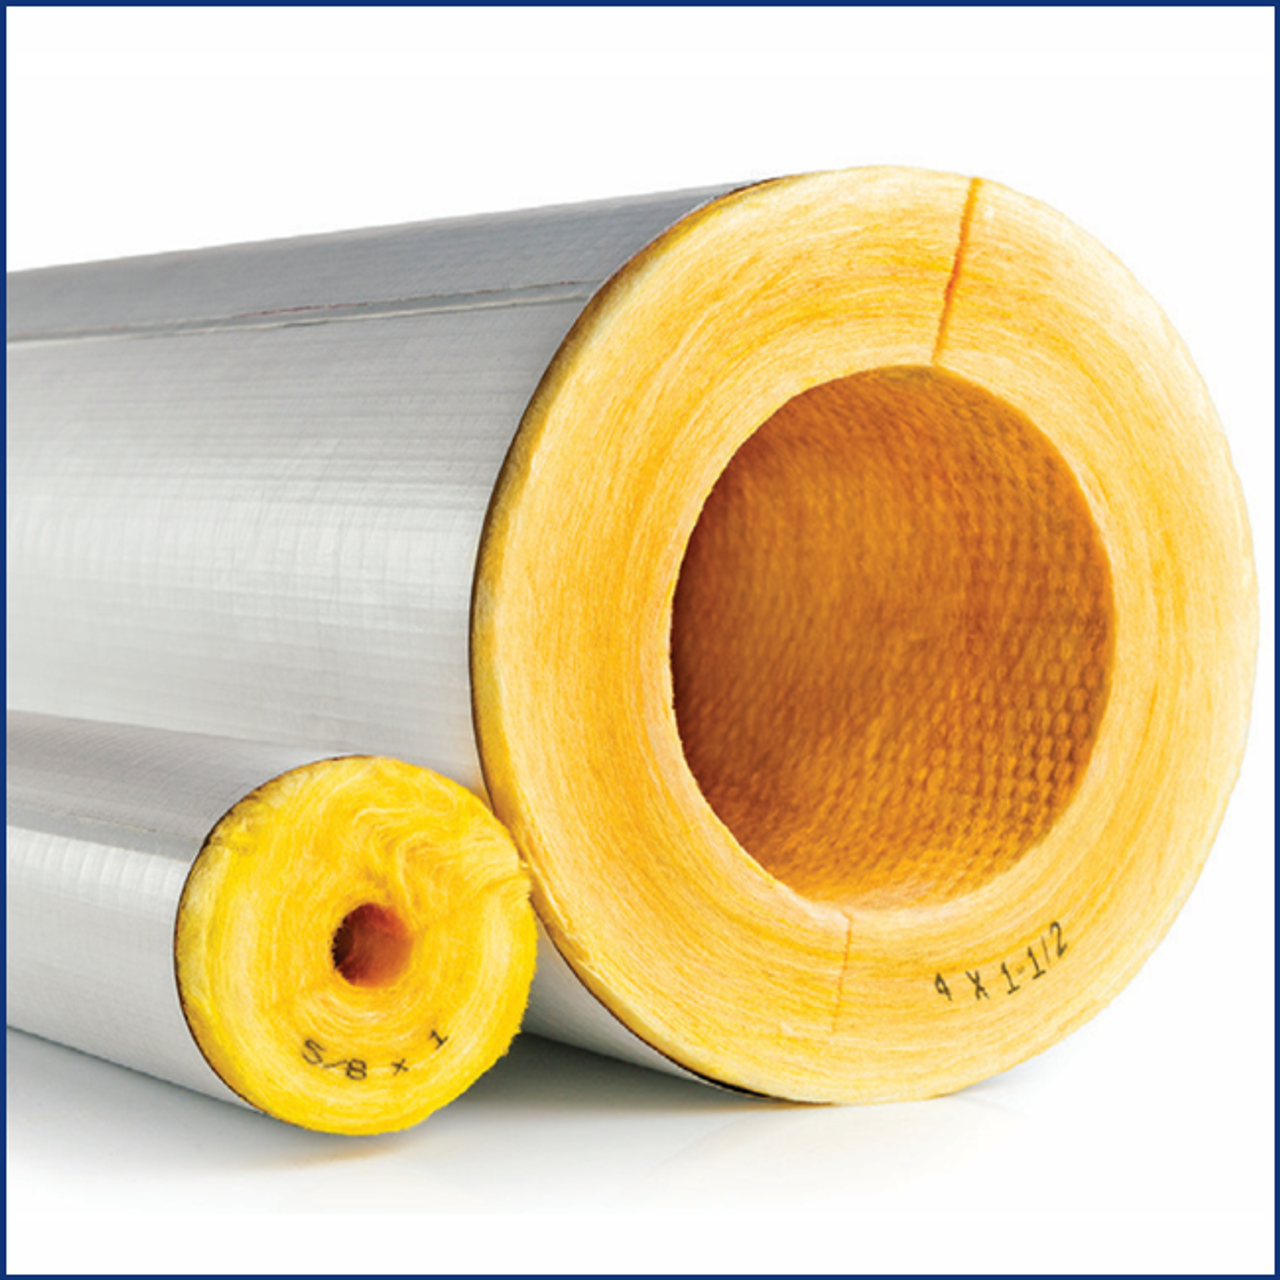 Fiberglass Pipe Insulation Covering for Hot & Cold Service Pipes